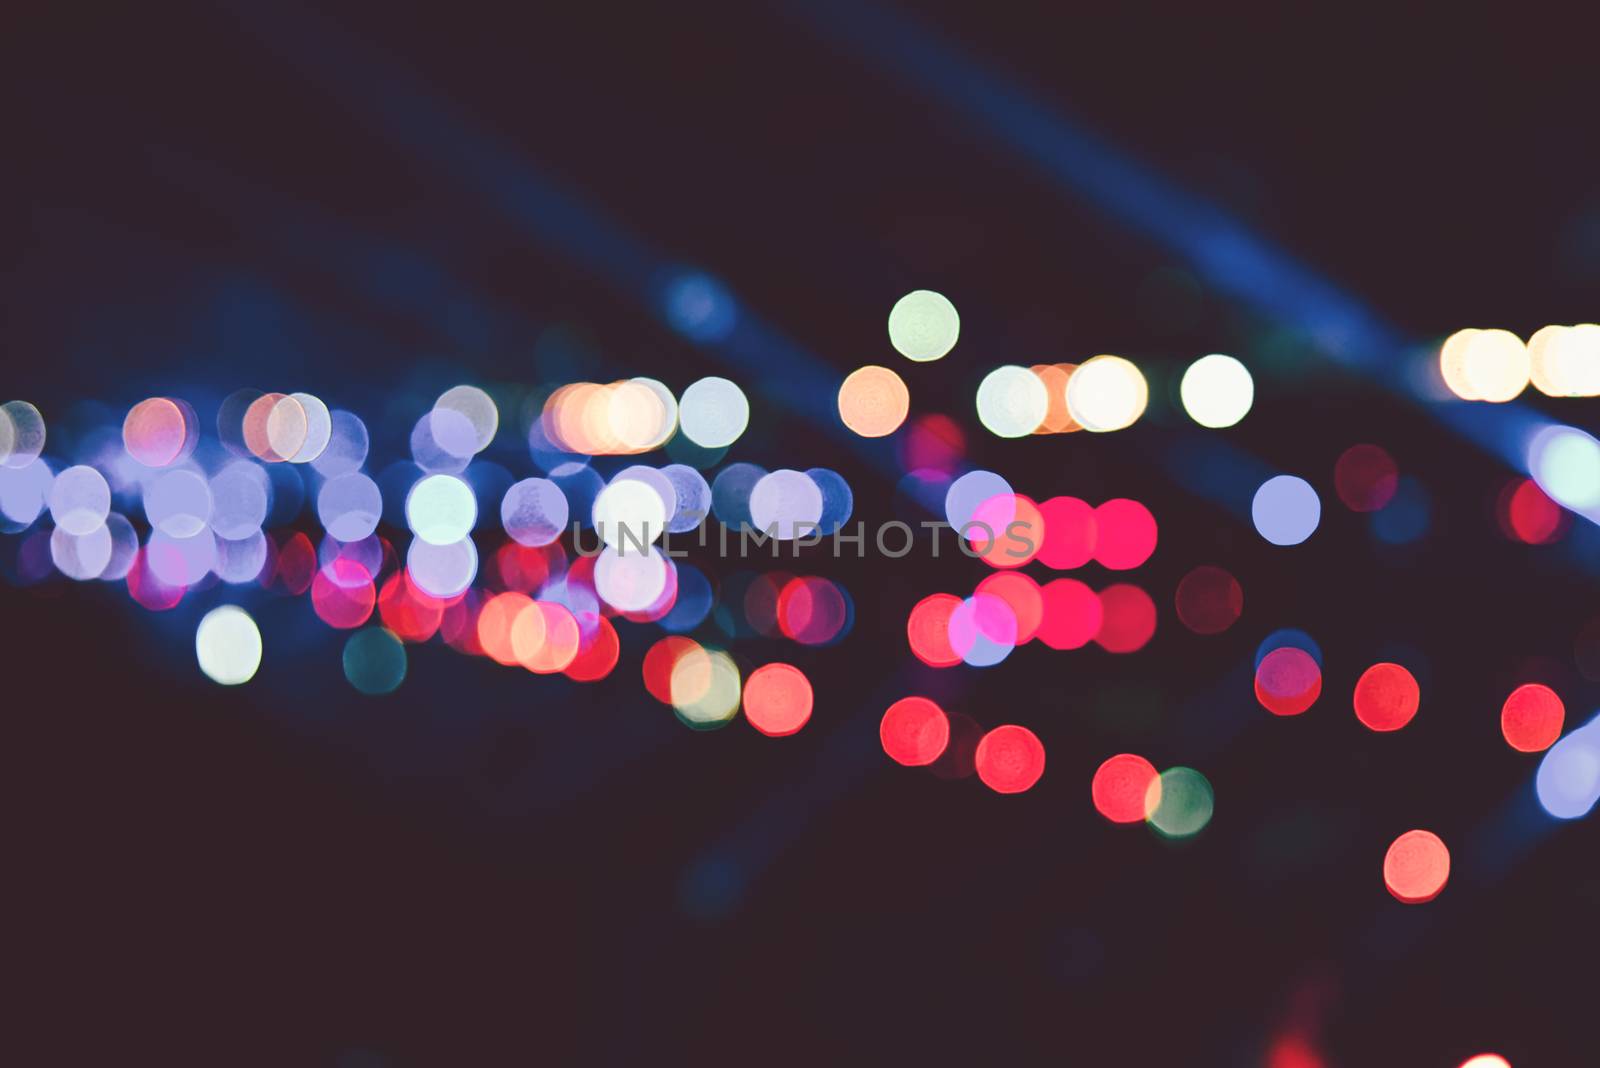 Blurred images of the background party in the festive festivities during the night, consisting of people and glittering bokeh.